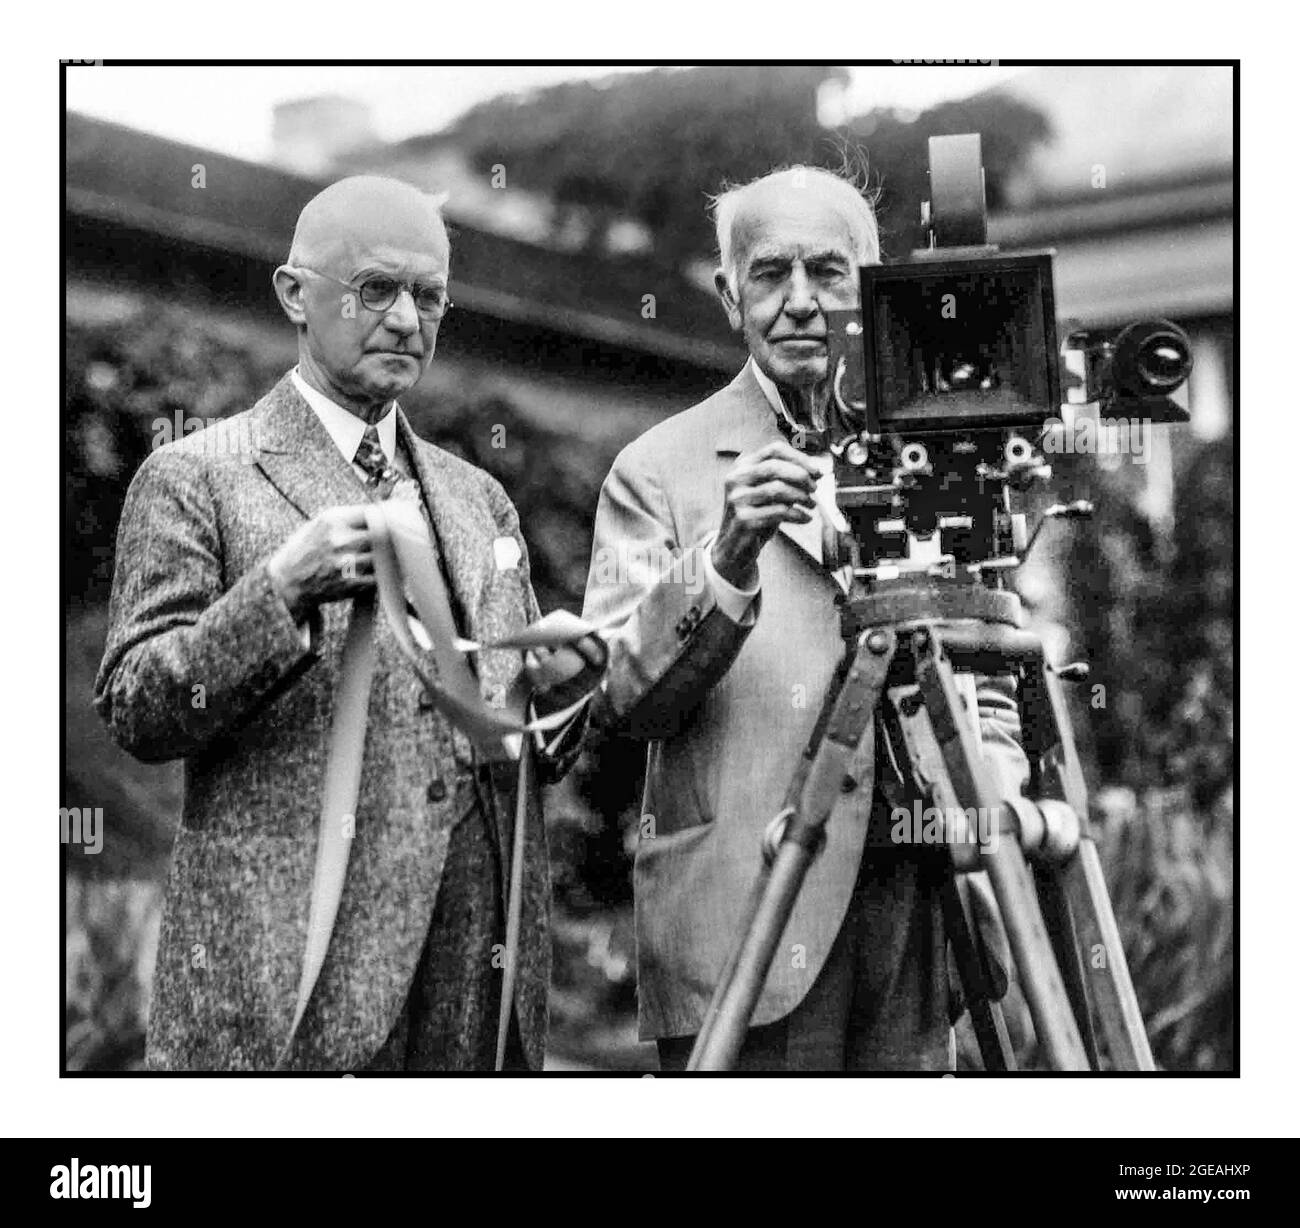 1928 film Black and White Stock Photos & Images - Alamy